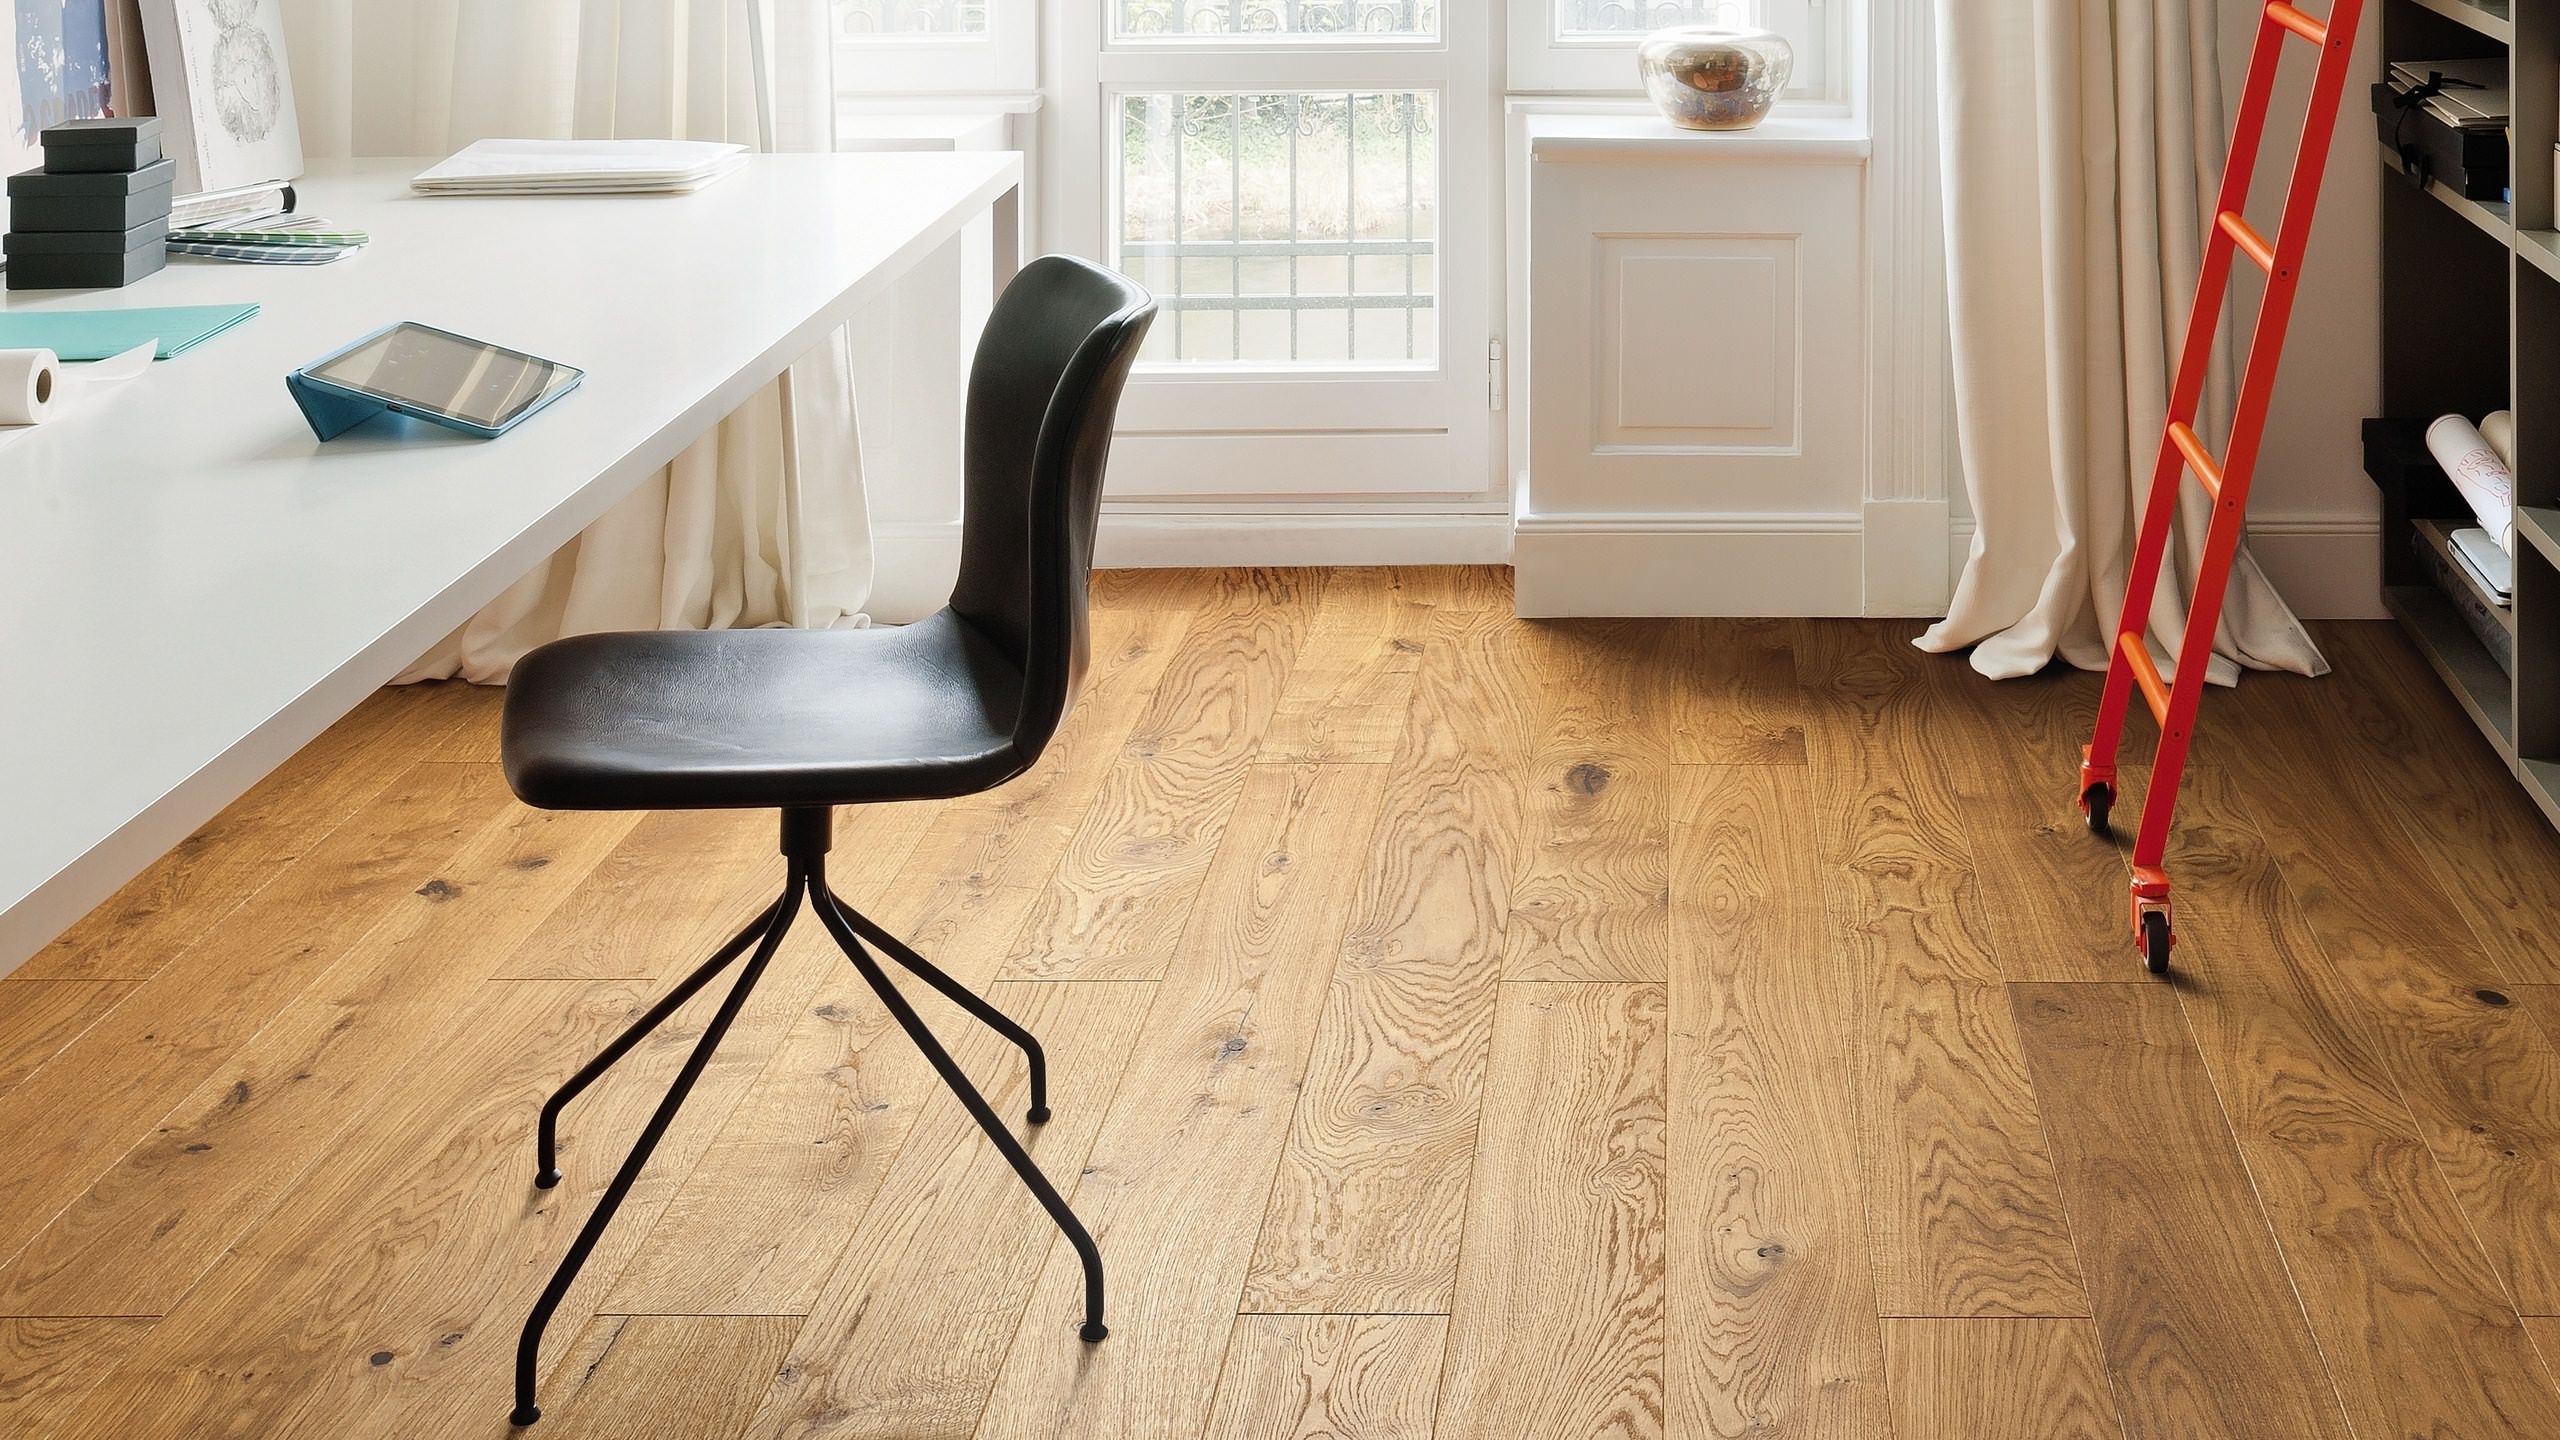 HARO PARQUET 4000 Plank 1-Strip Maxim 4V Oak Sauvage brushed naturaLin plus Tongue and Groove